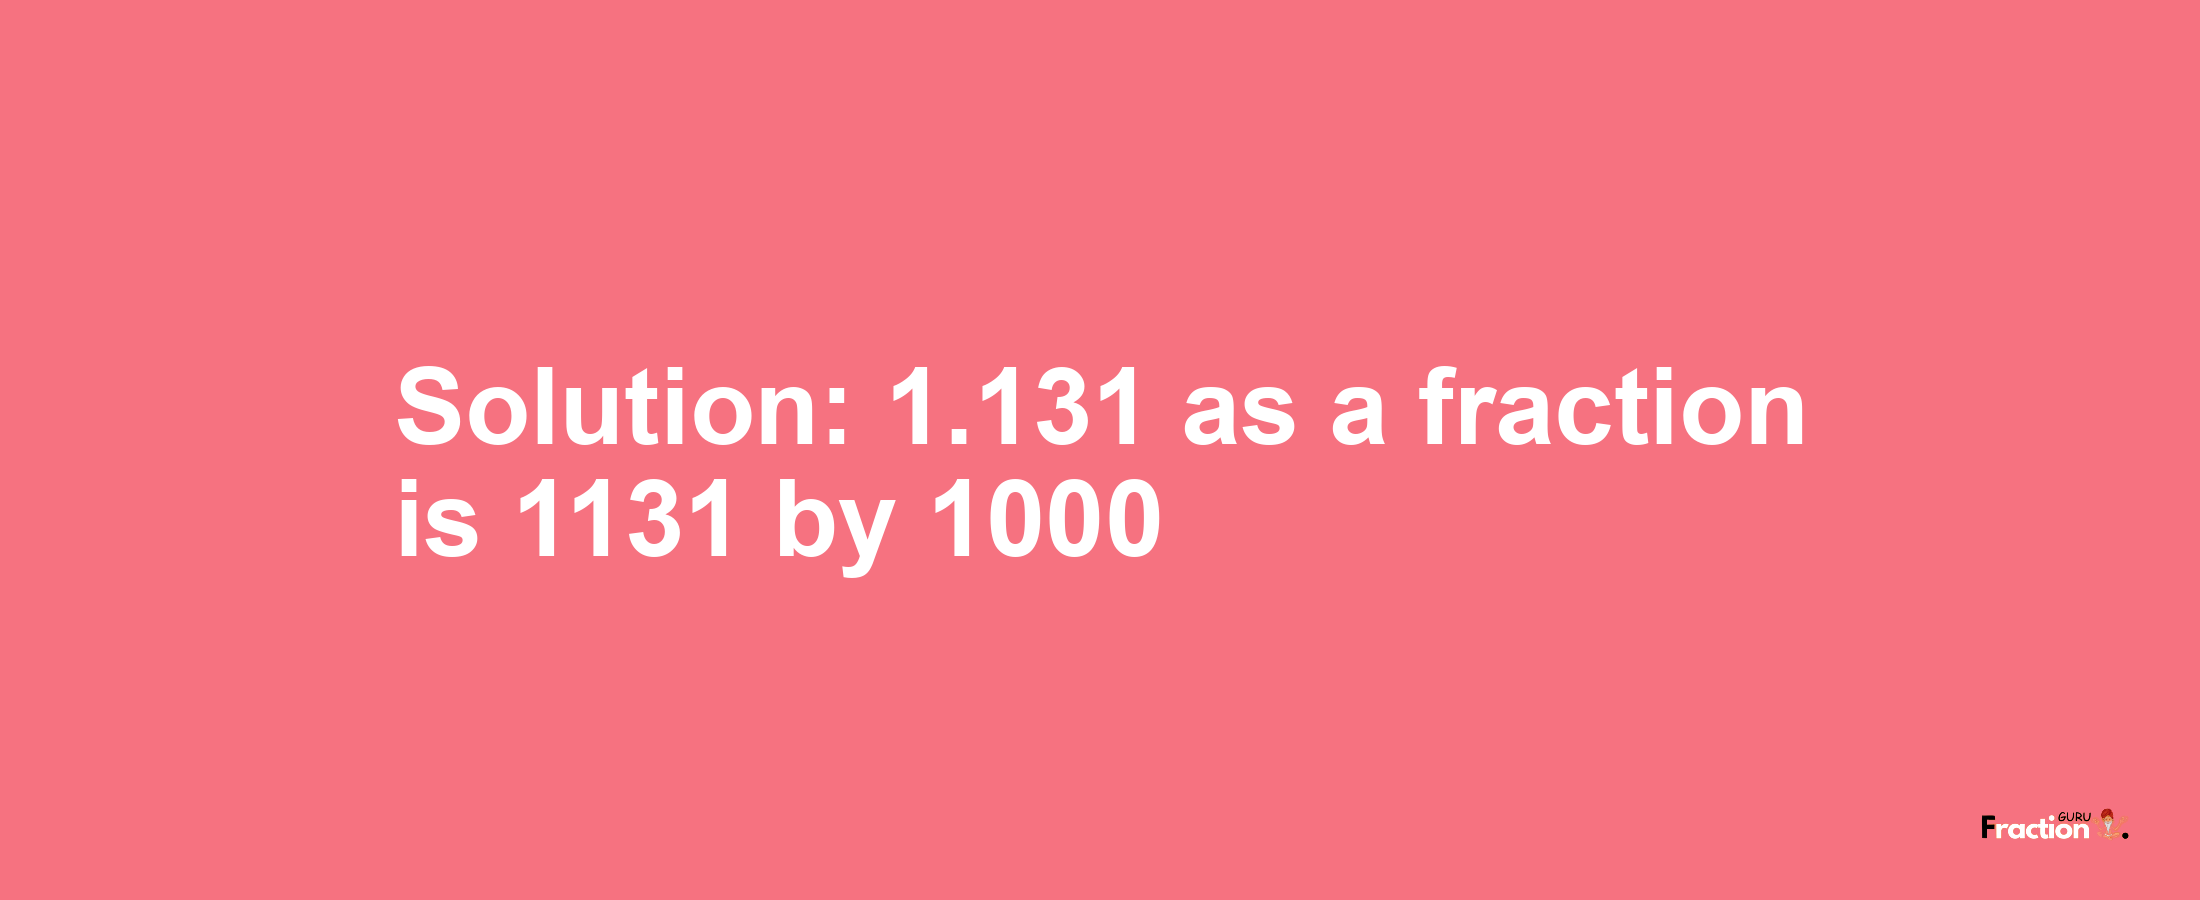 Solution:1.131 as a fraction is 1131/1000